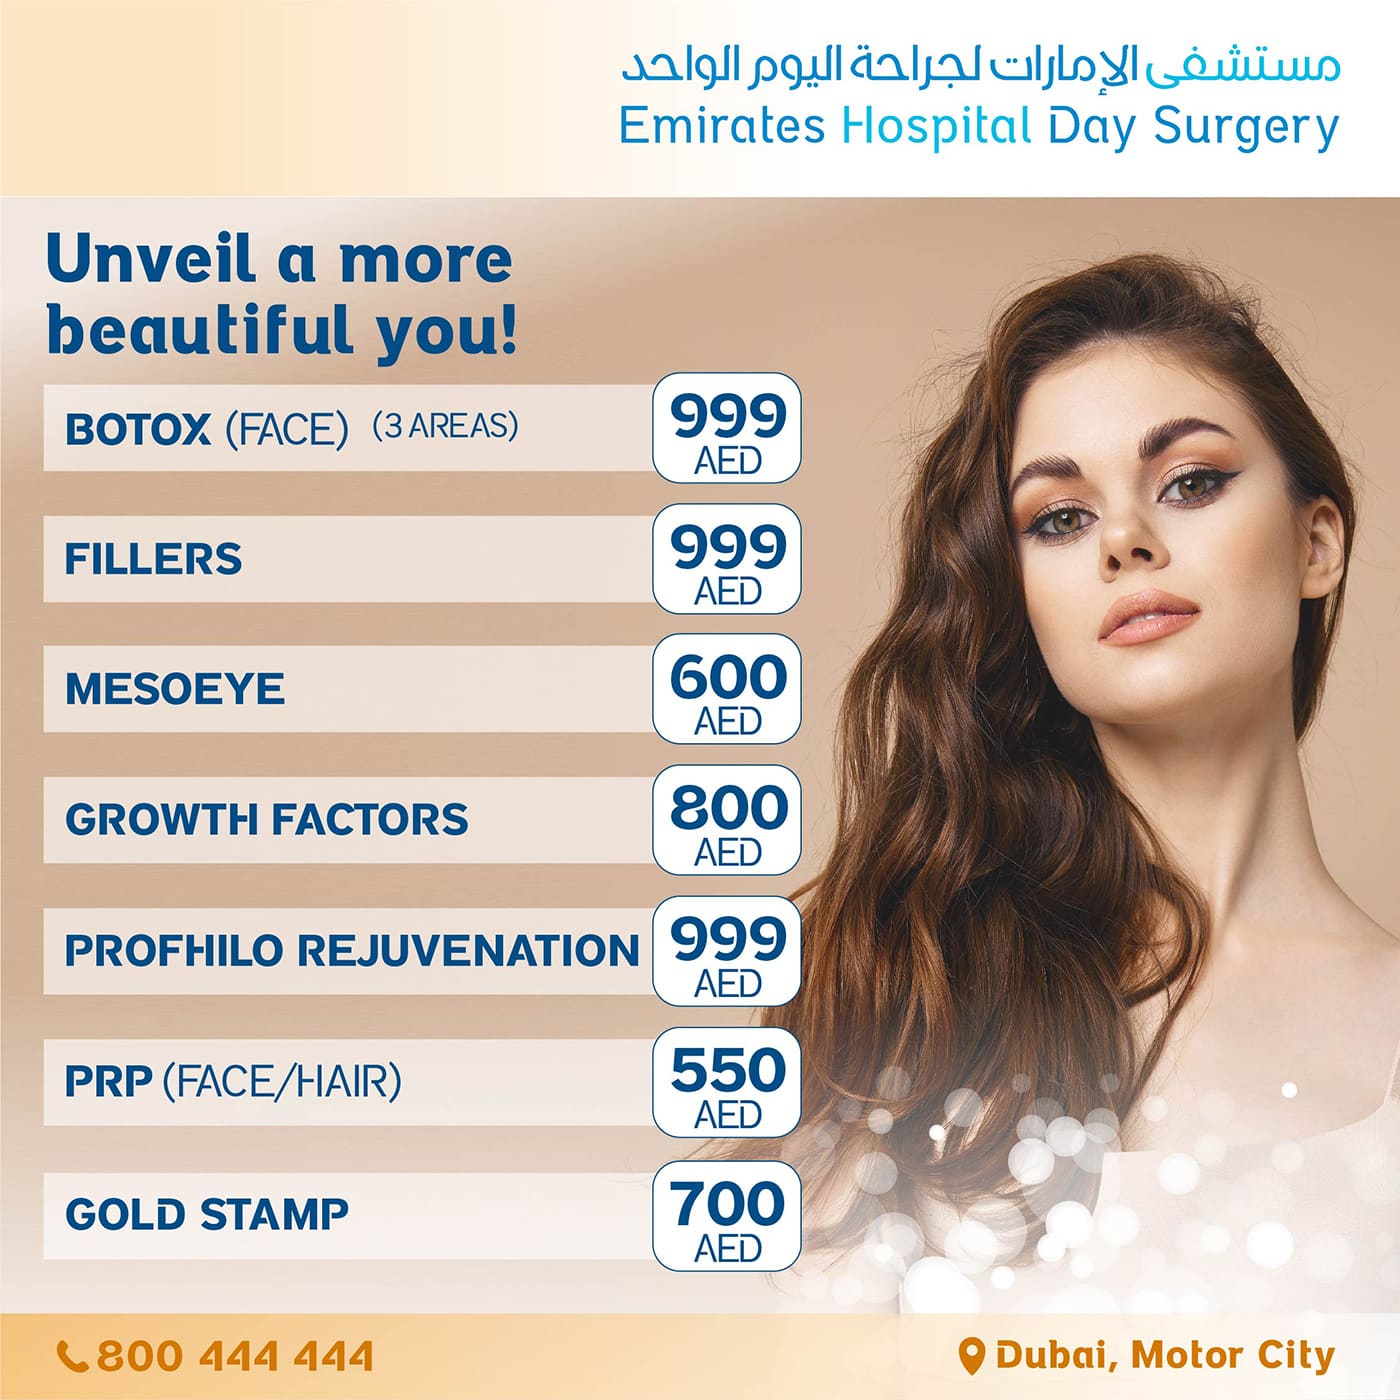 Special-DermaOffer-EHDS-MC-May-2022-SM